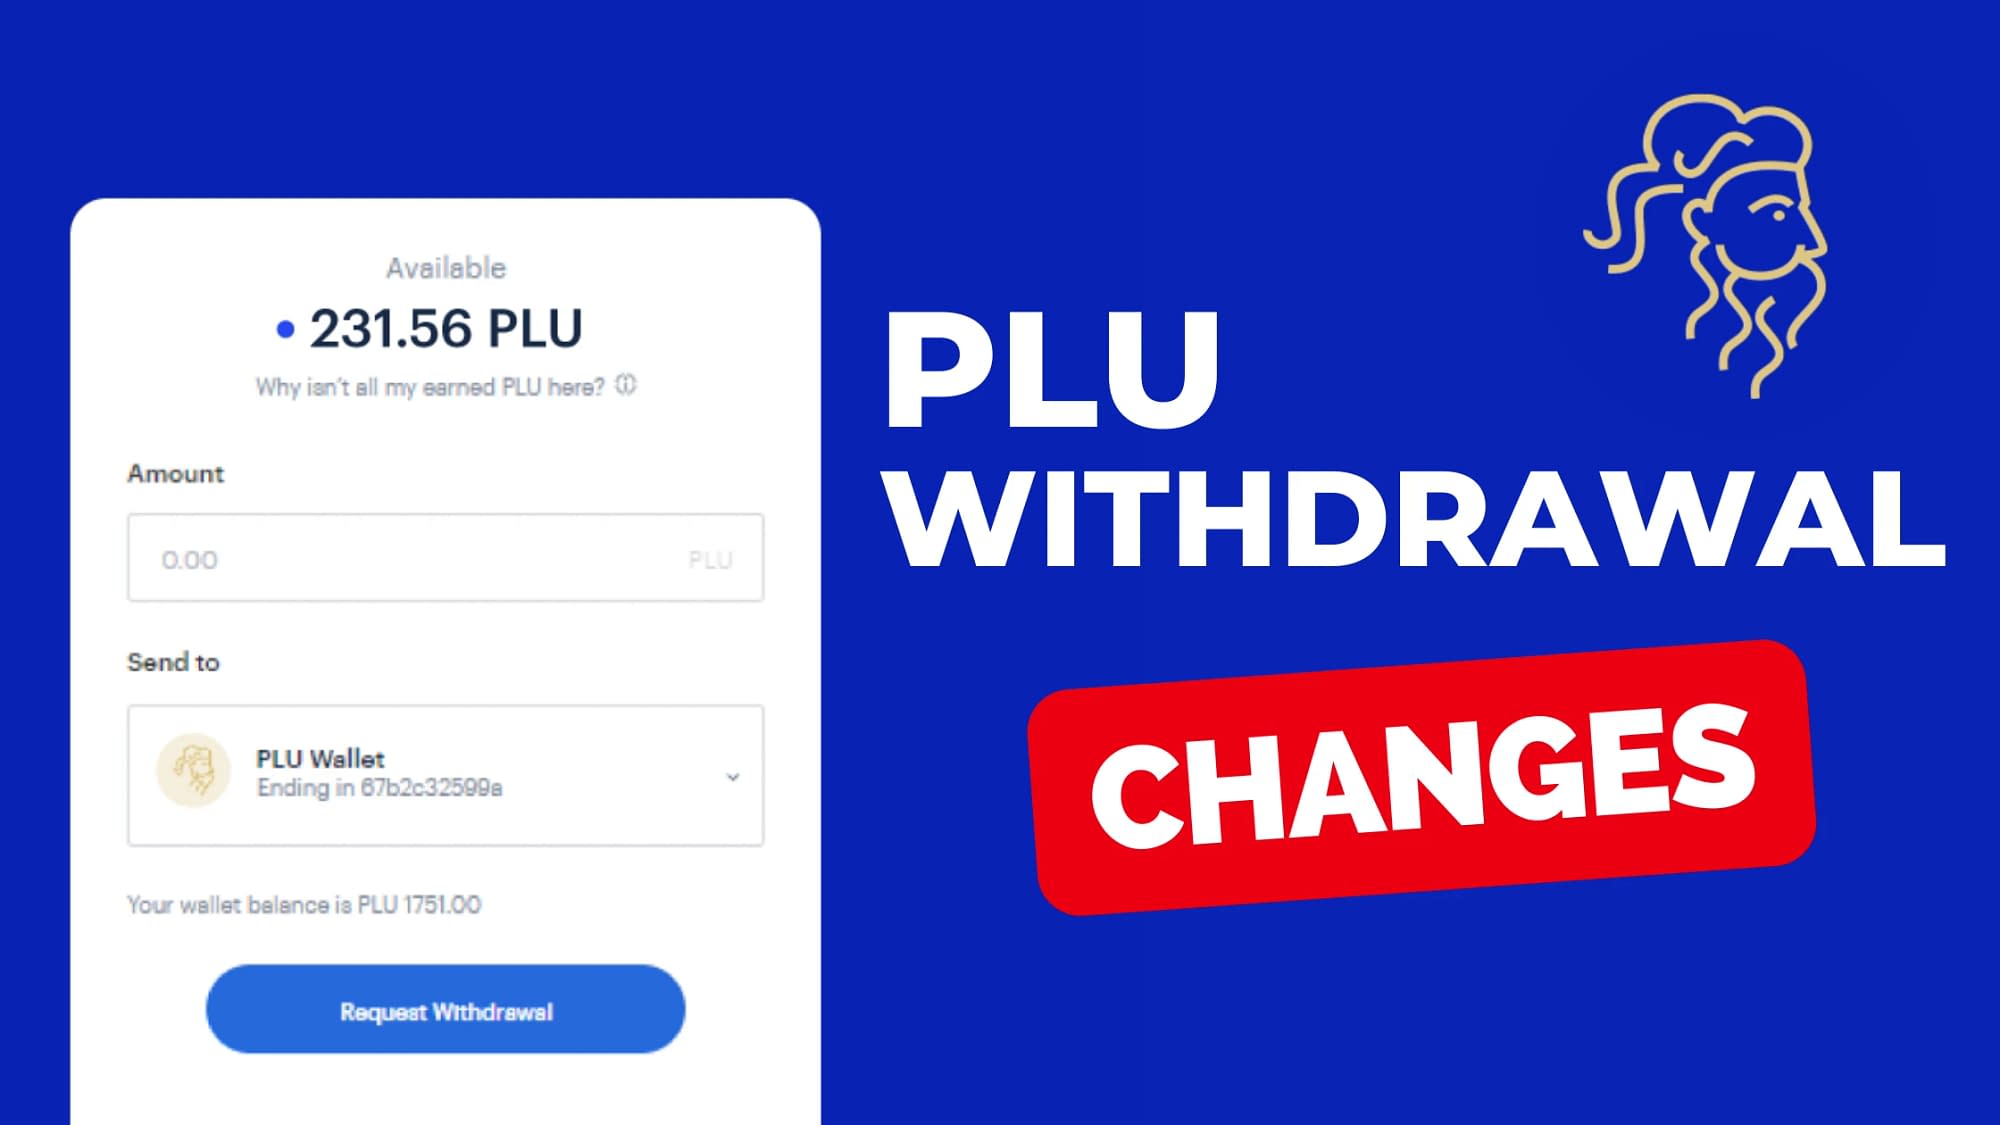 Plutus Announces PLU Withdrawal Changes